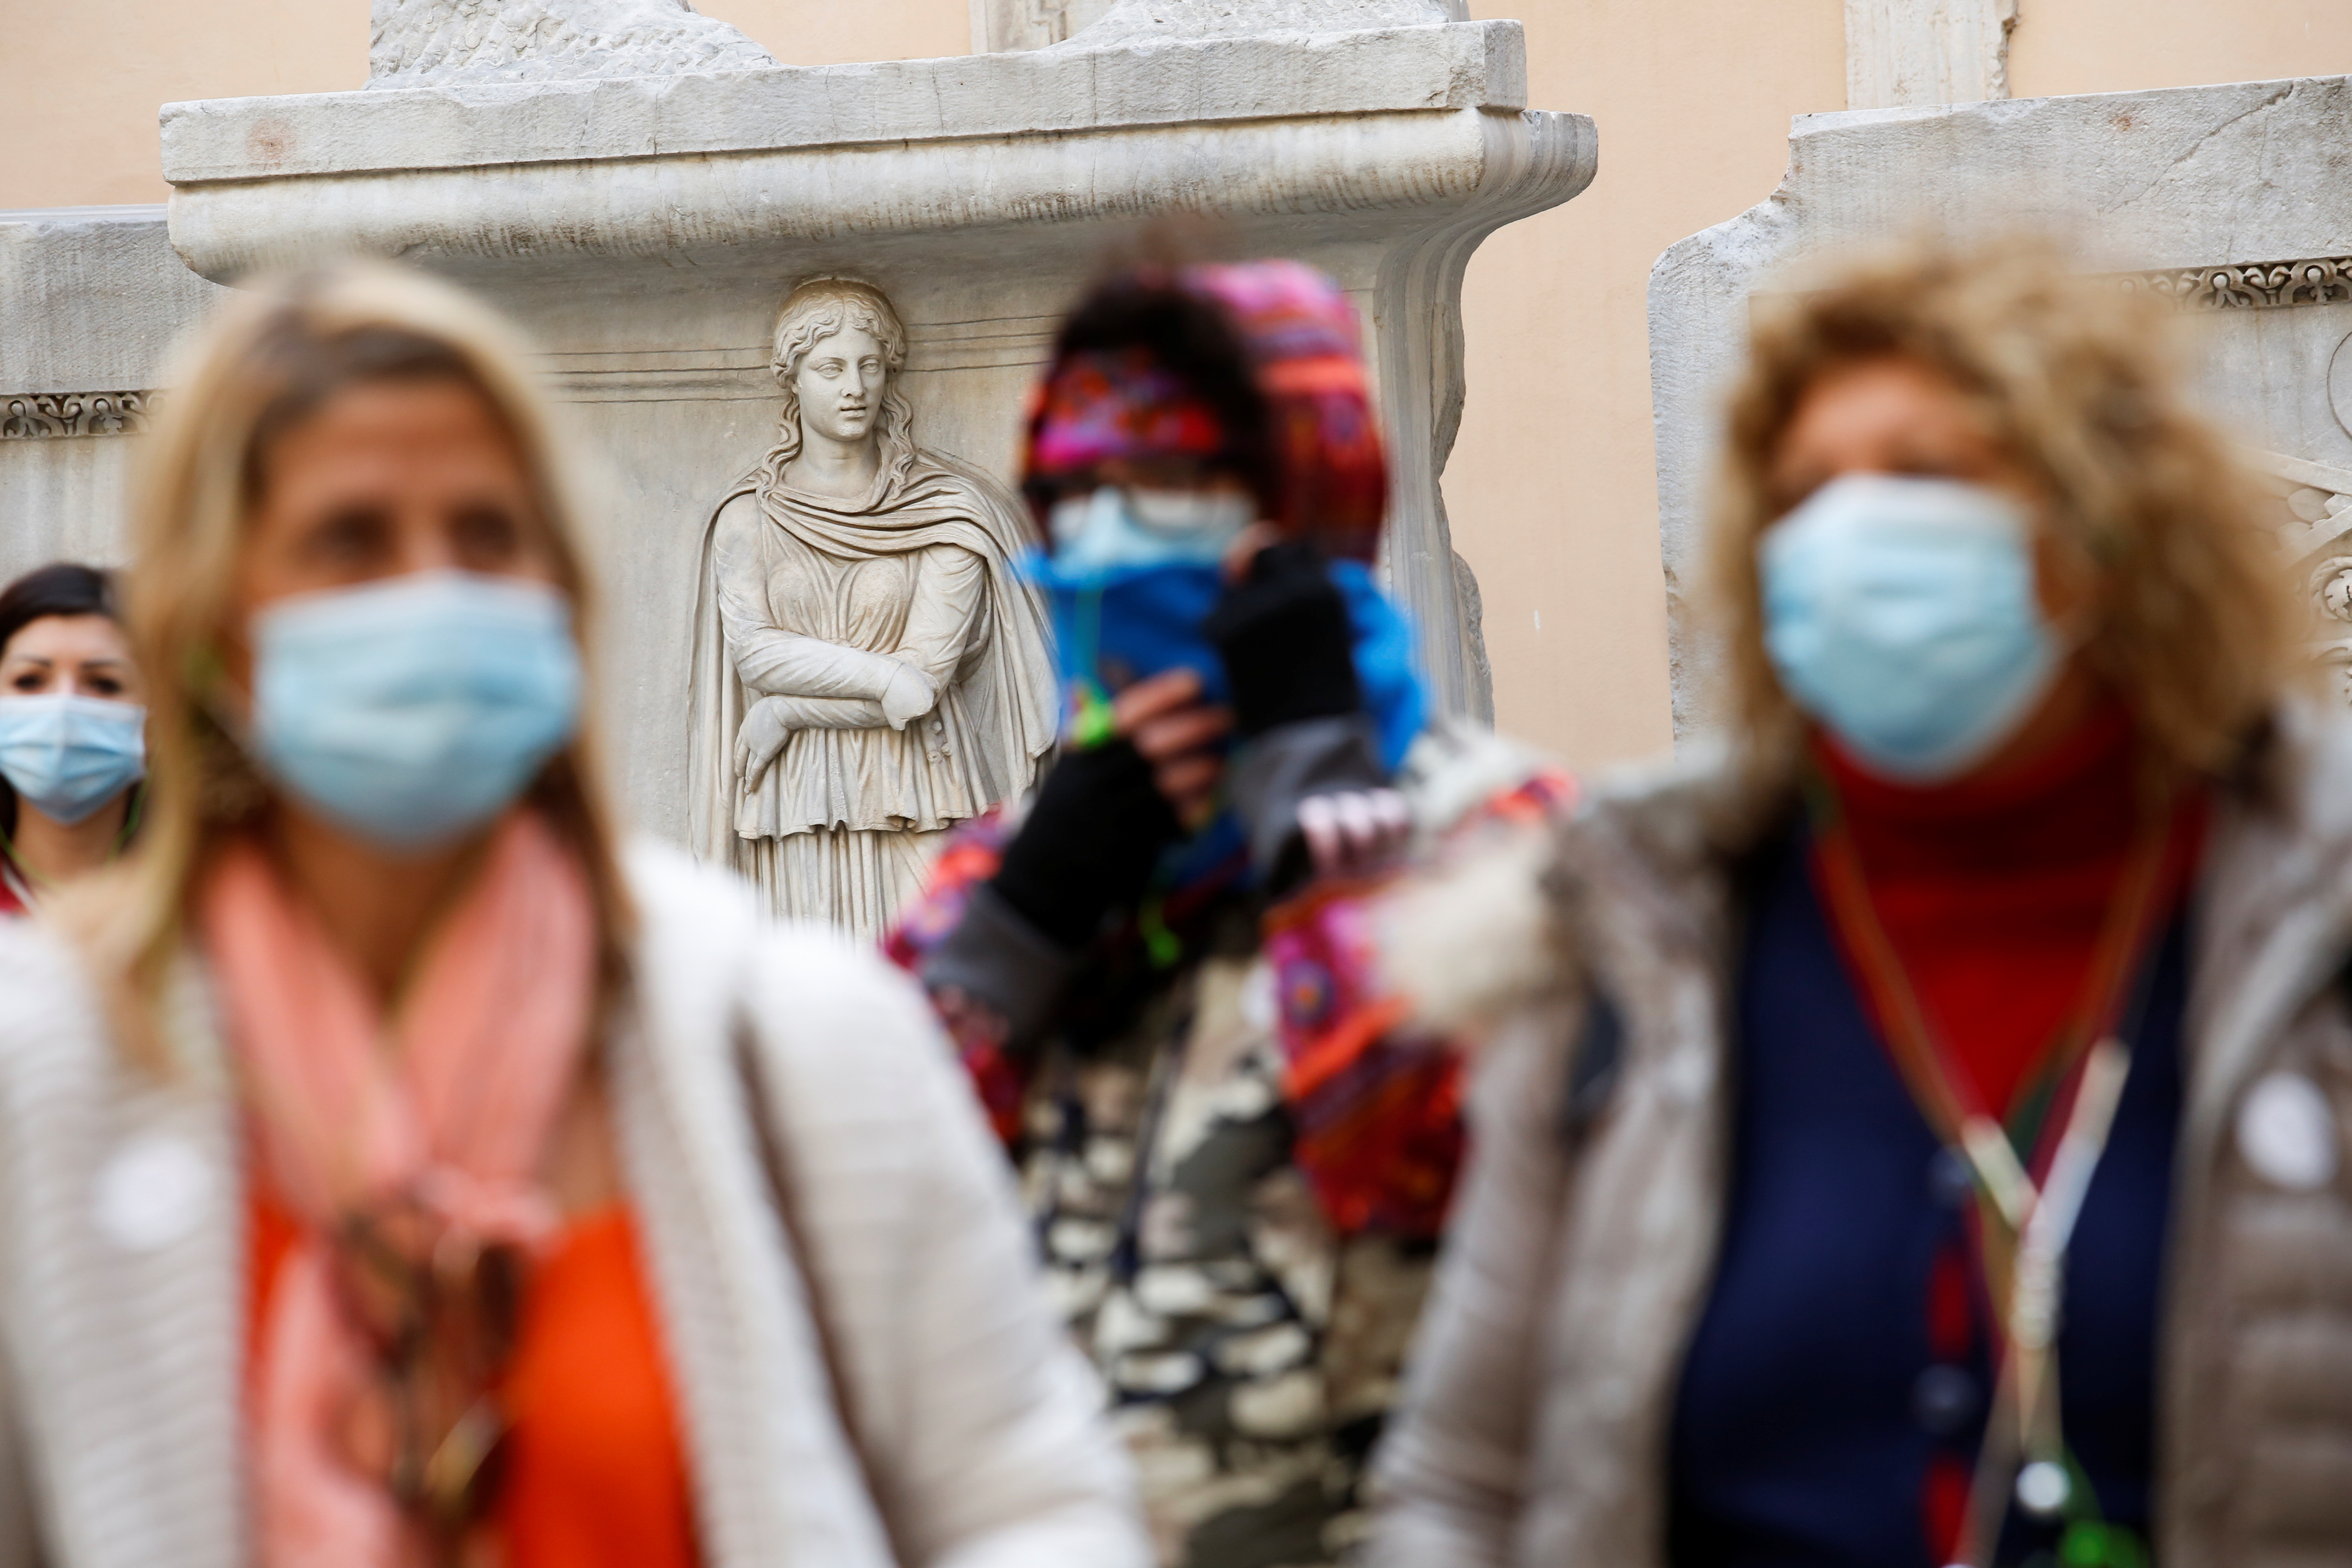 People wearing protective face masks walk at Capitoline Museums (Musei Capitolini), on the day before coronavirus disease (COVID-19) health passes, known as Green Passes, become mandatory on public transport, in Rome, Italy December 5, 2021. REUTERS/Remo Casilli